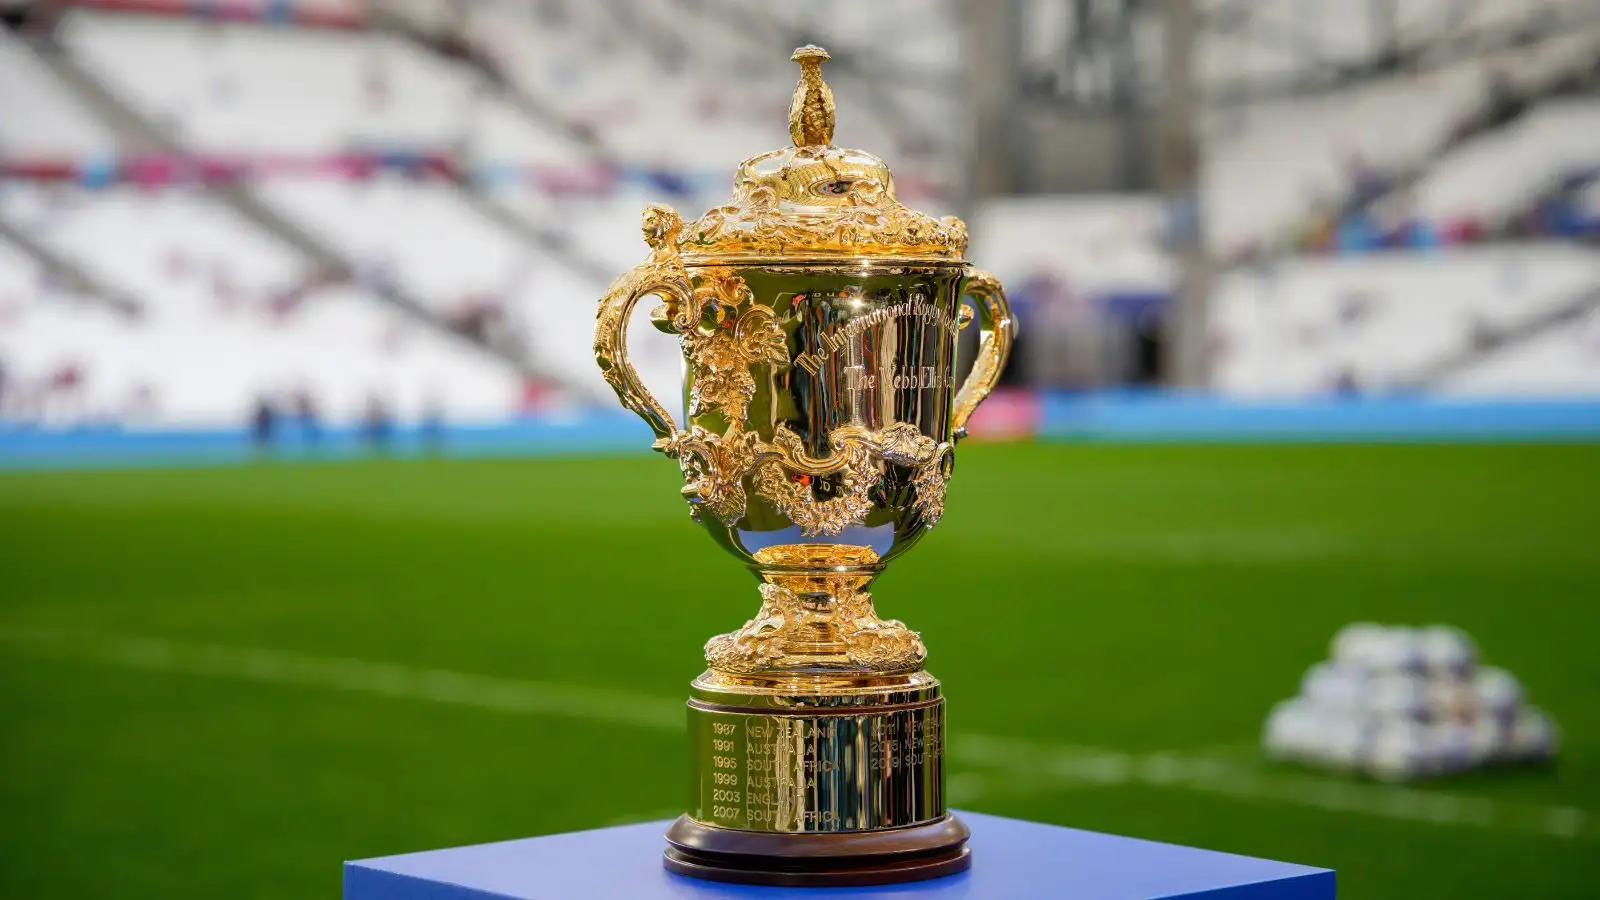 The world cup trophy at the France Vs New Zealand match. In a